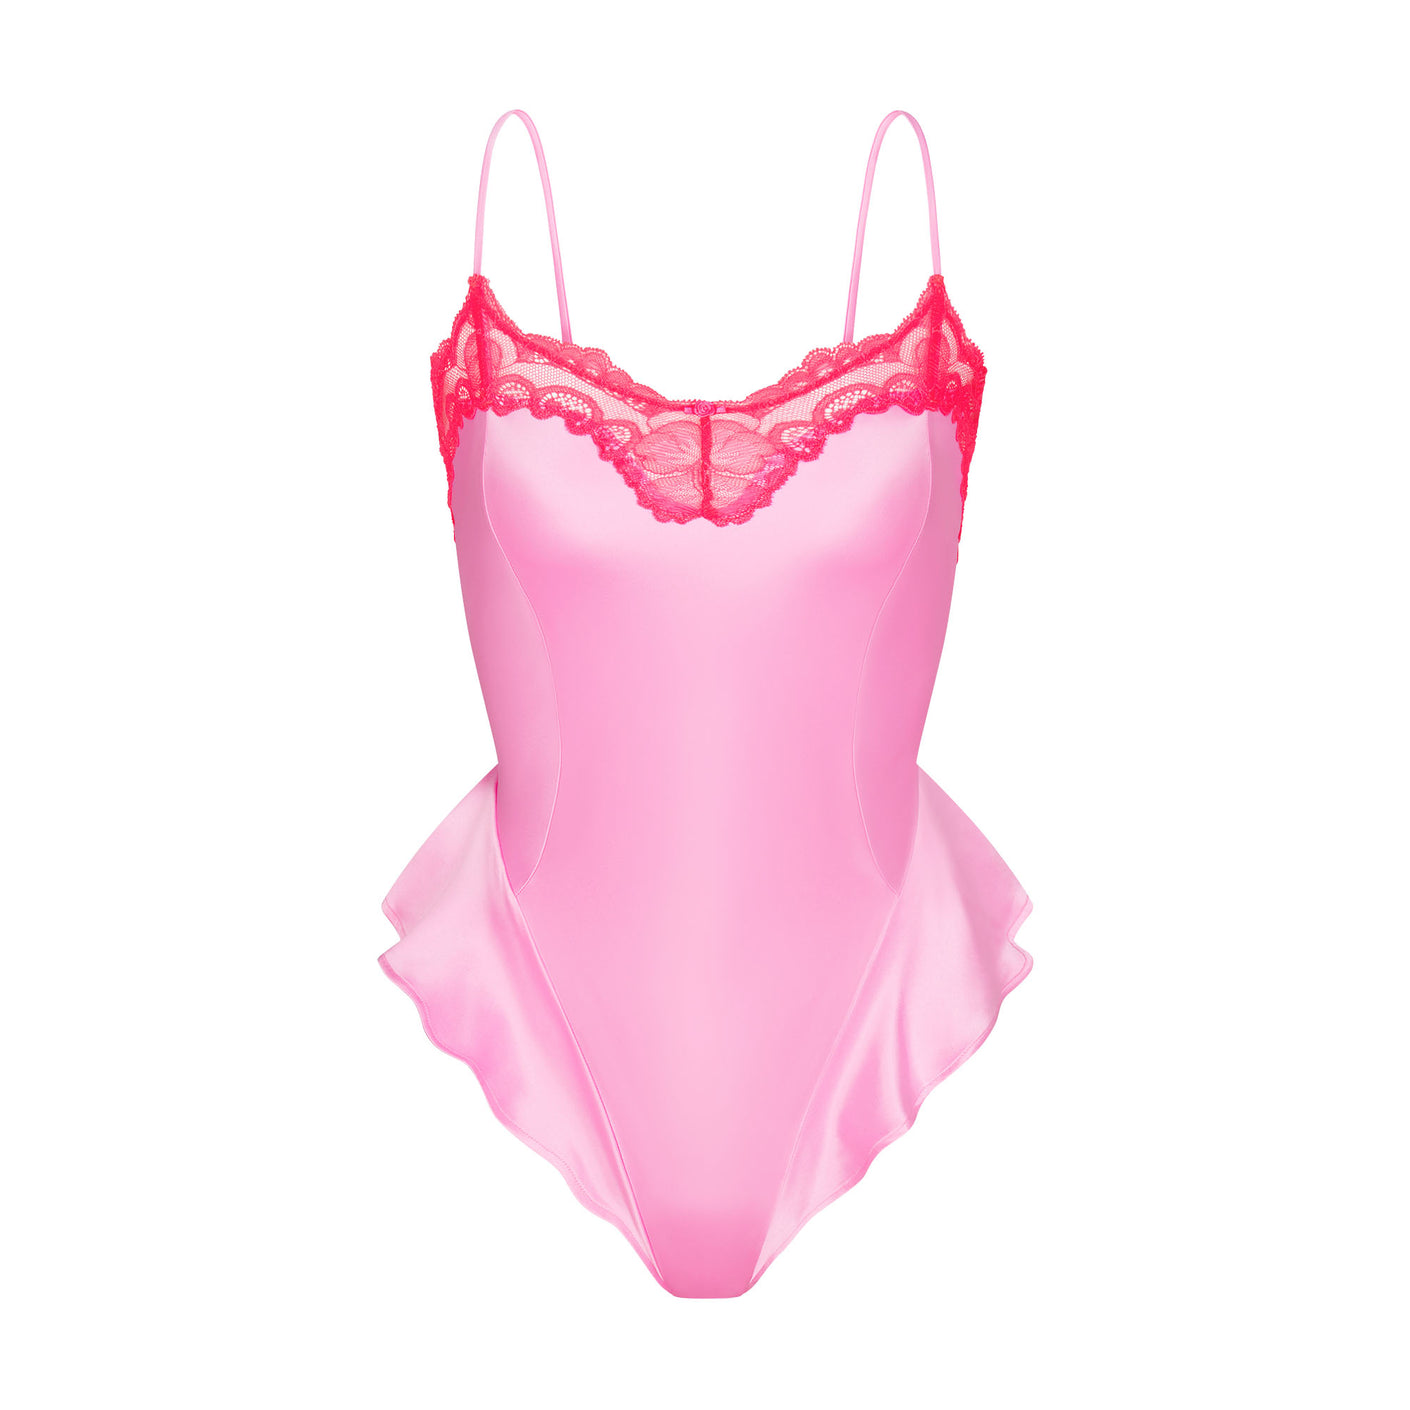 WOVEN SHINE LACE TEDDY | NEON ORCHID